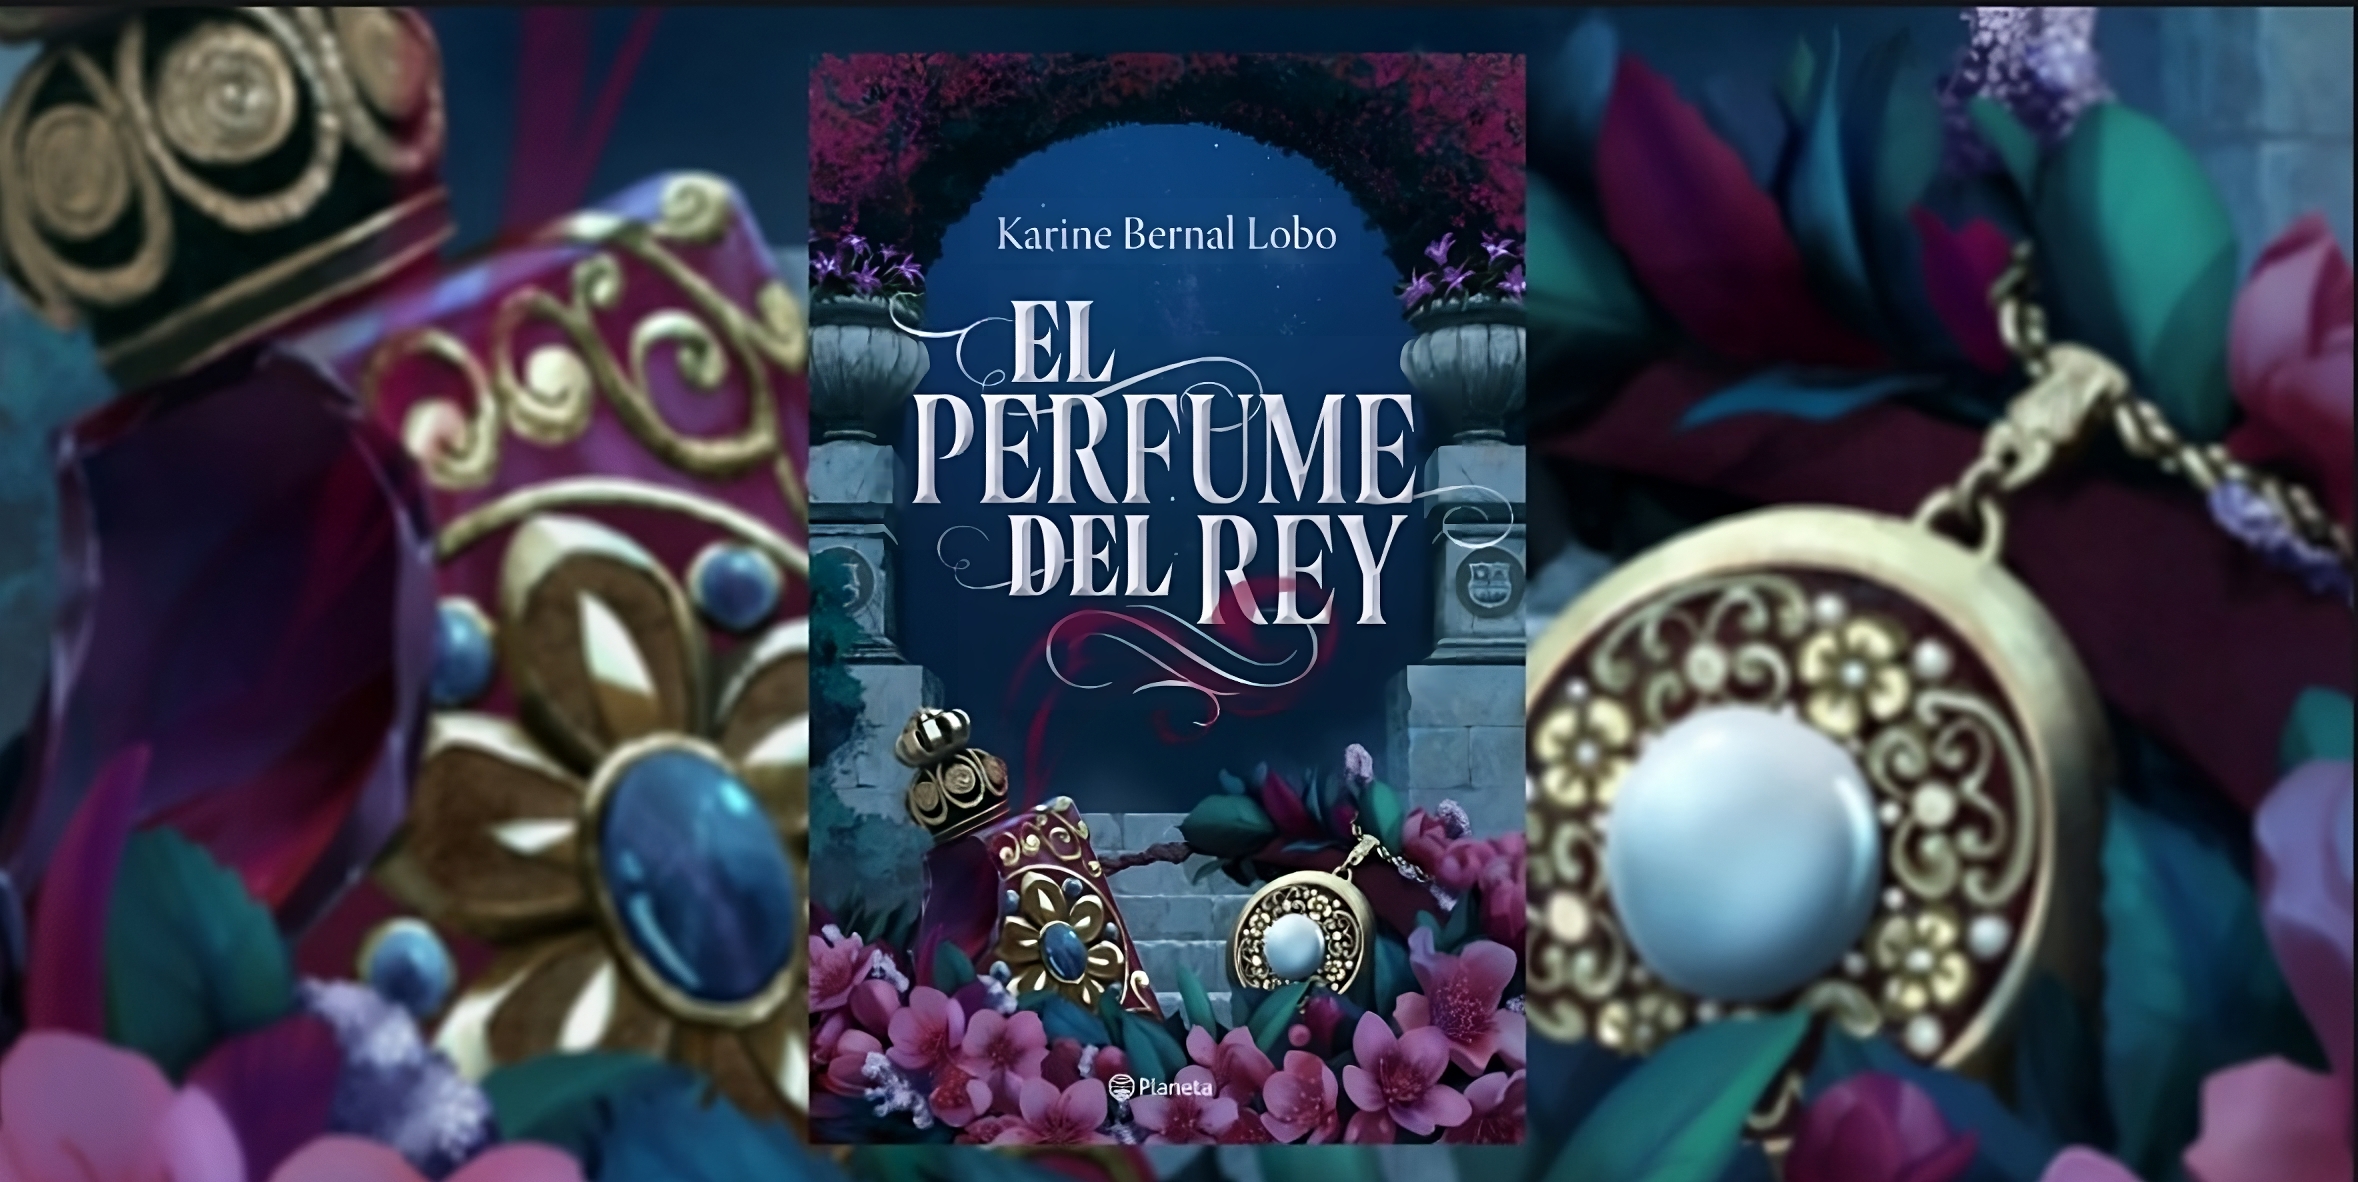 Cover of the book "The perfume of the king", by Karine Bernal Lobo.  (Planet of Books).